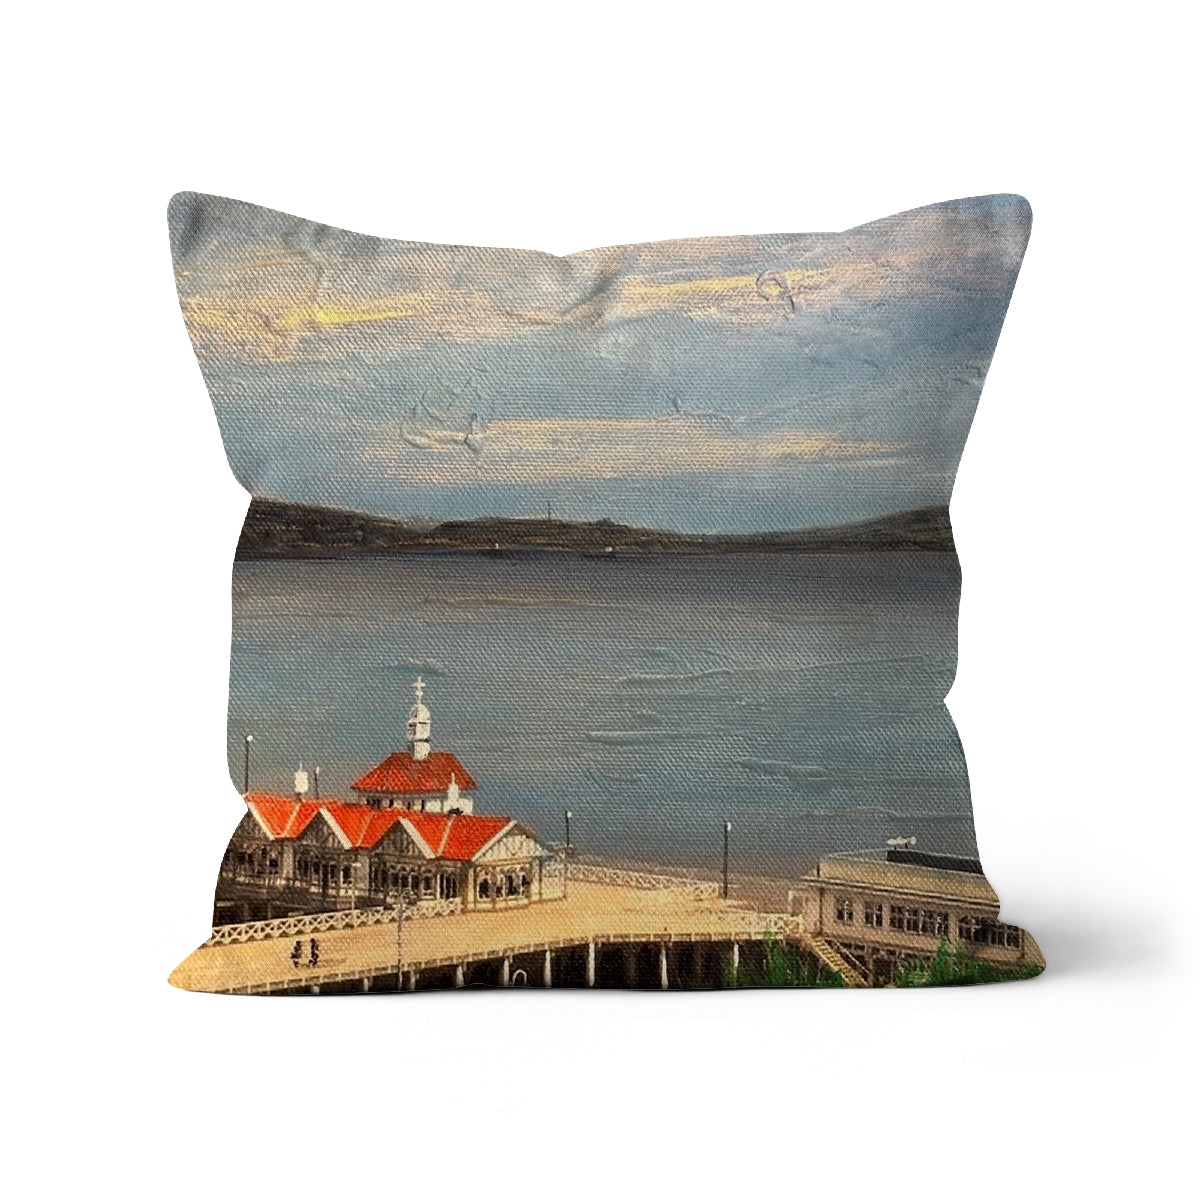 Looking From Dunoon Art Gifts Cushion-Cushions-River Clyde Art Gallery-Linen-24"x24"-Paintings, Prints, Homeware, Art Gifts From Scotland By Scottish Artist Kevin Hunter